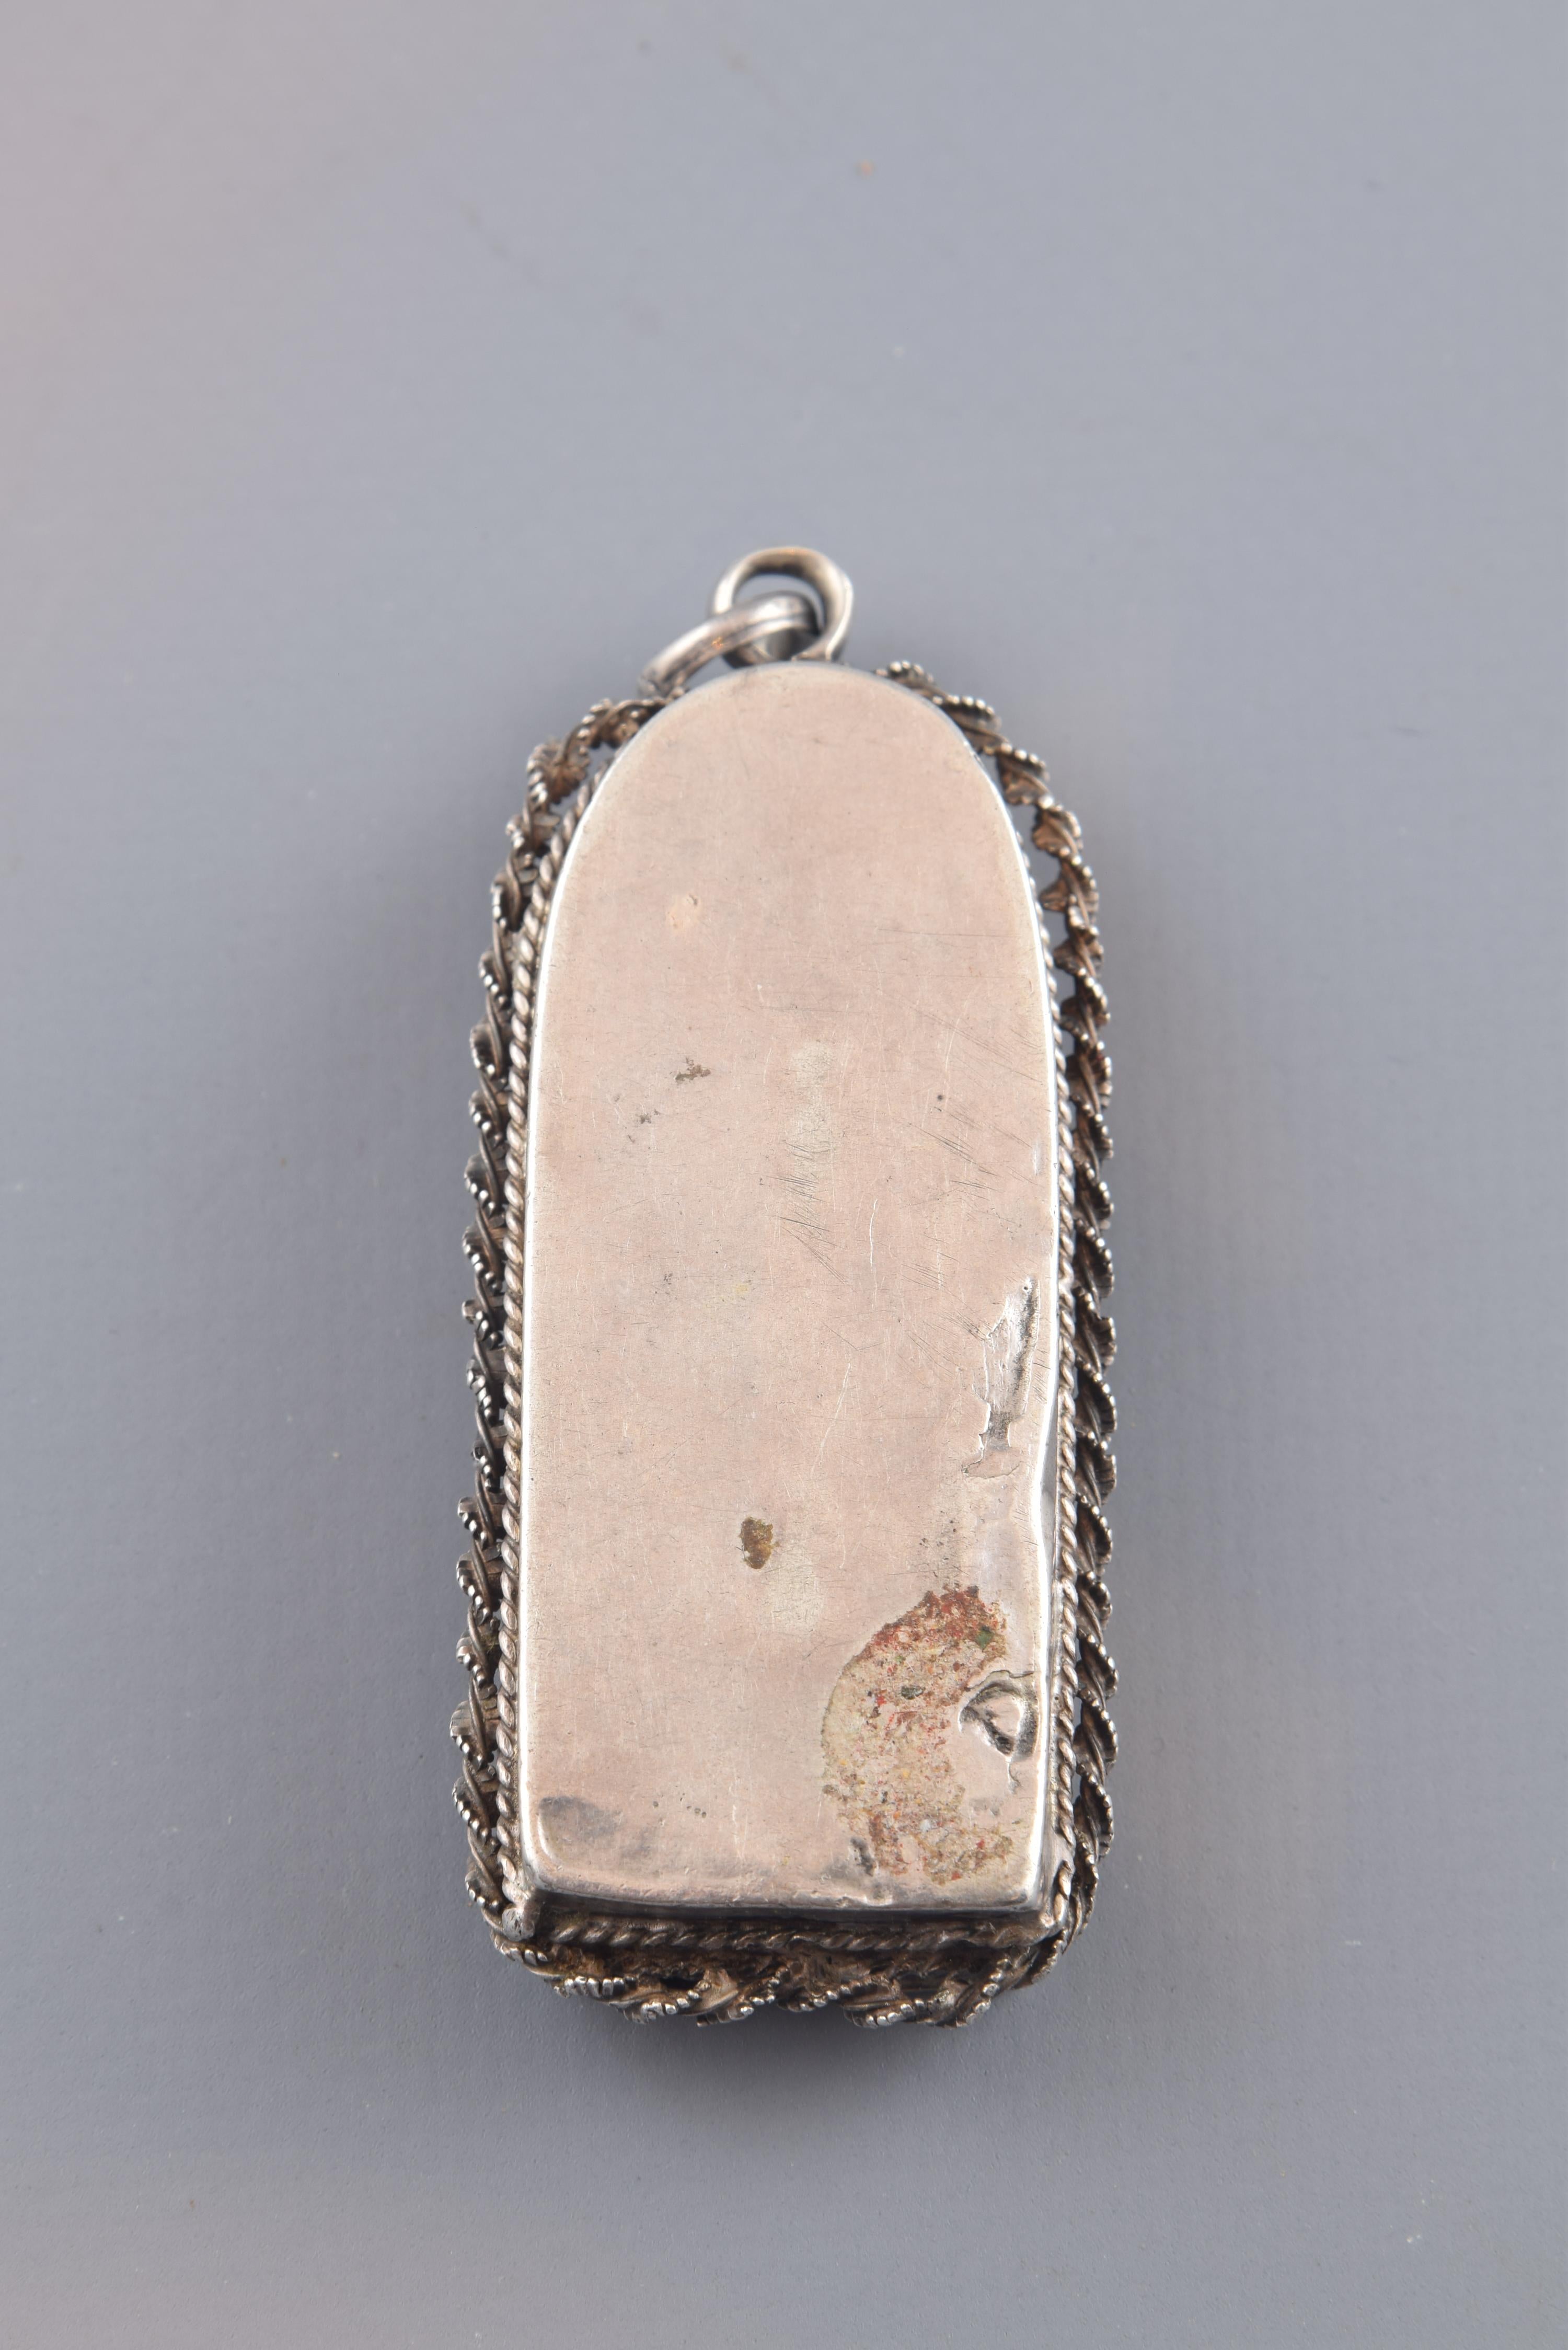 Baroque Reliquary Pendant, Silver, Glass, Wood, 17th Century